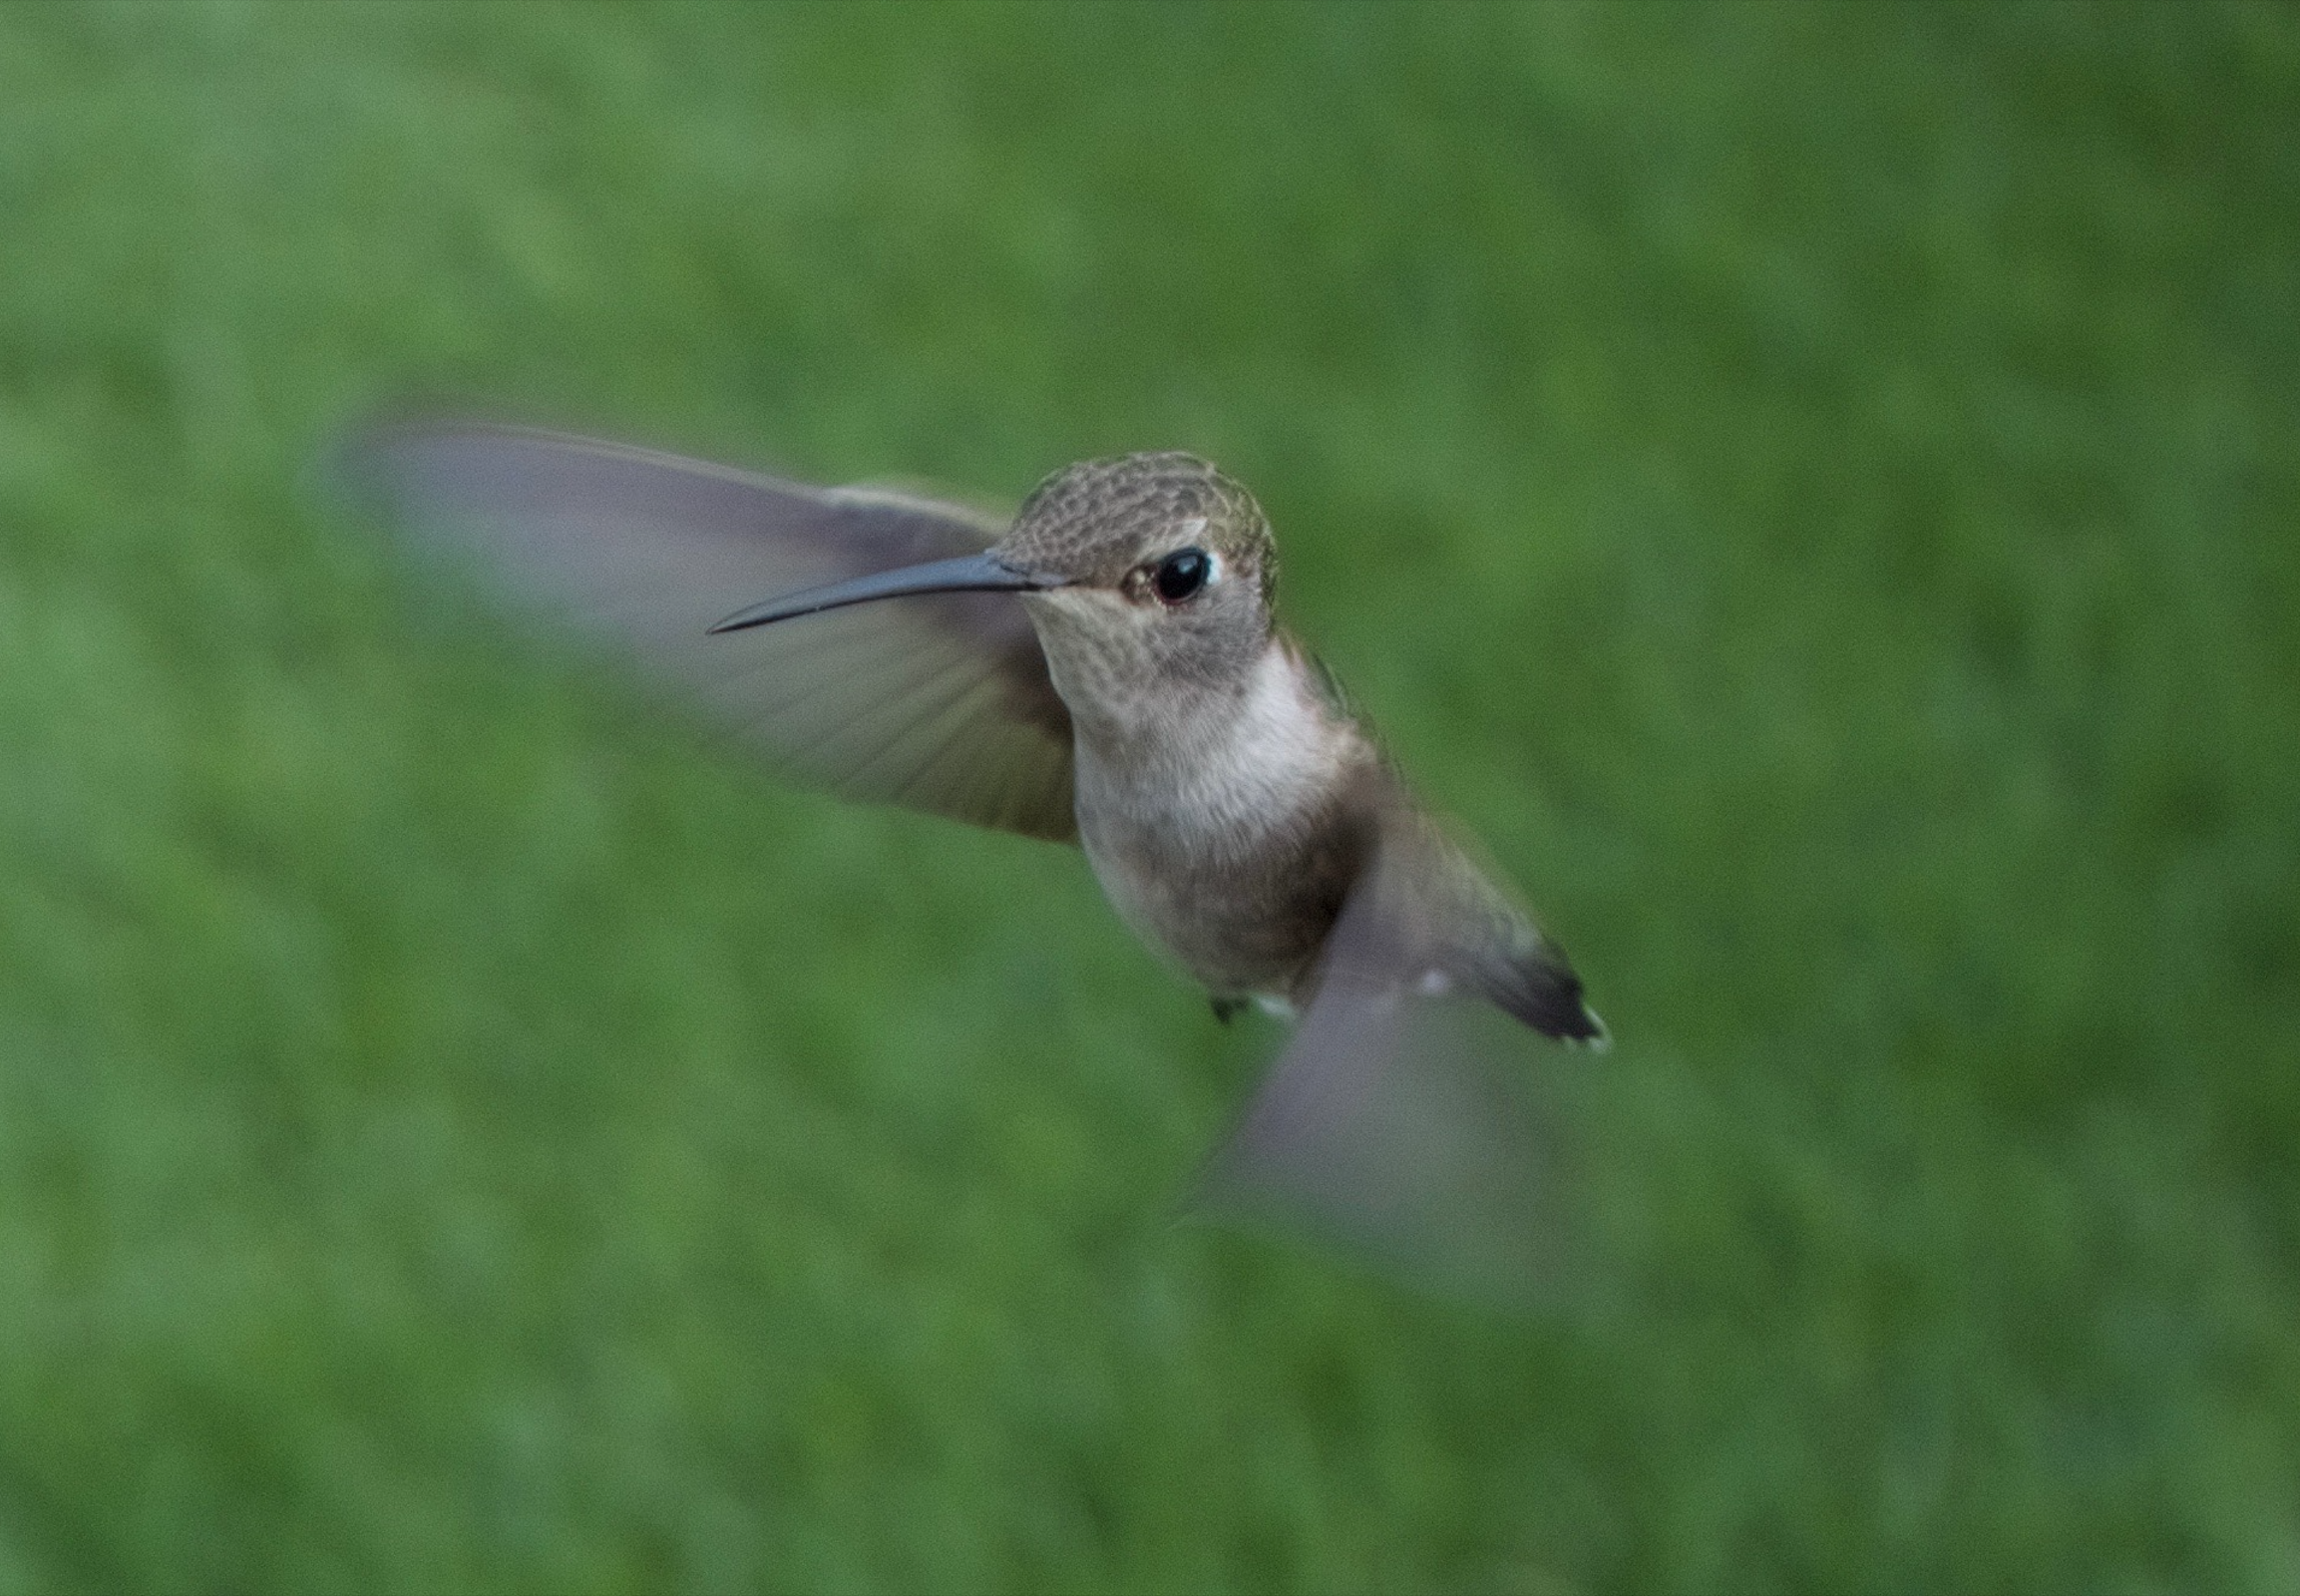 A picture of a hummingbird.